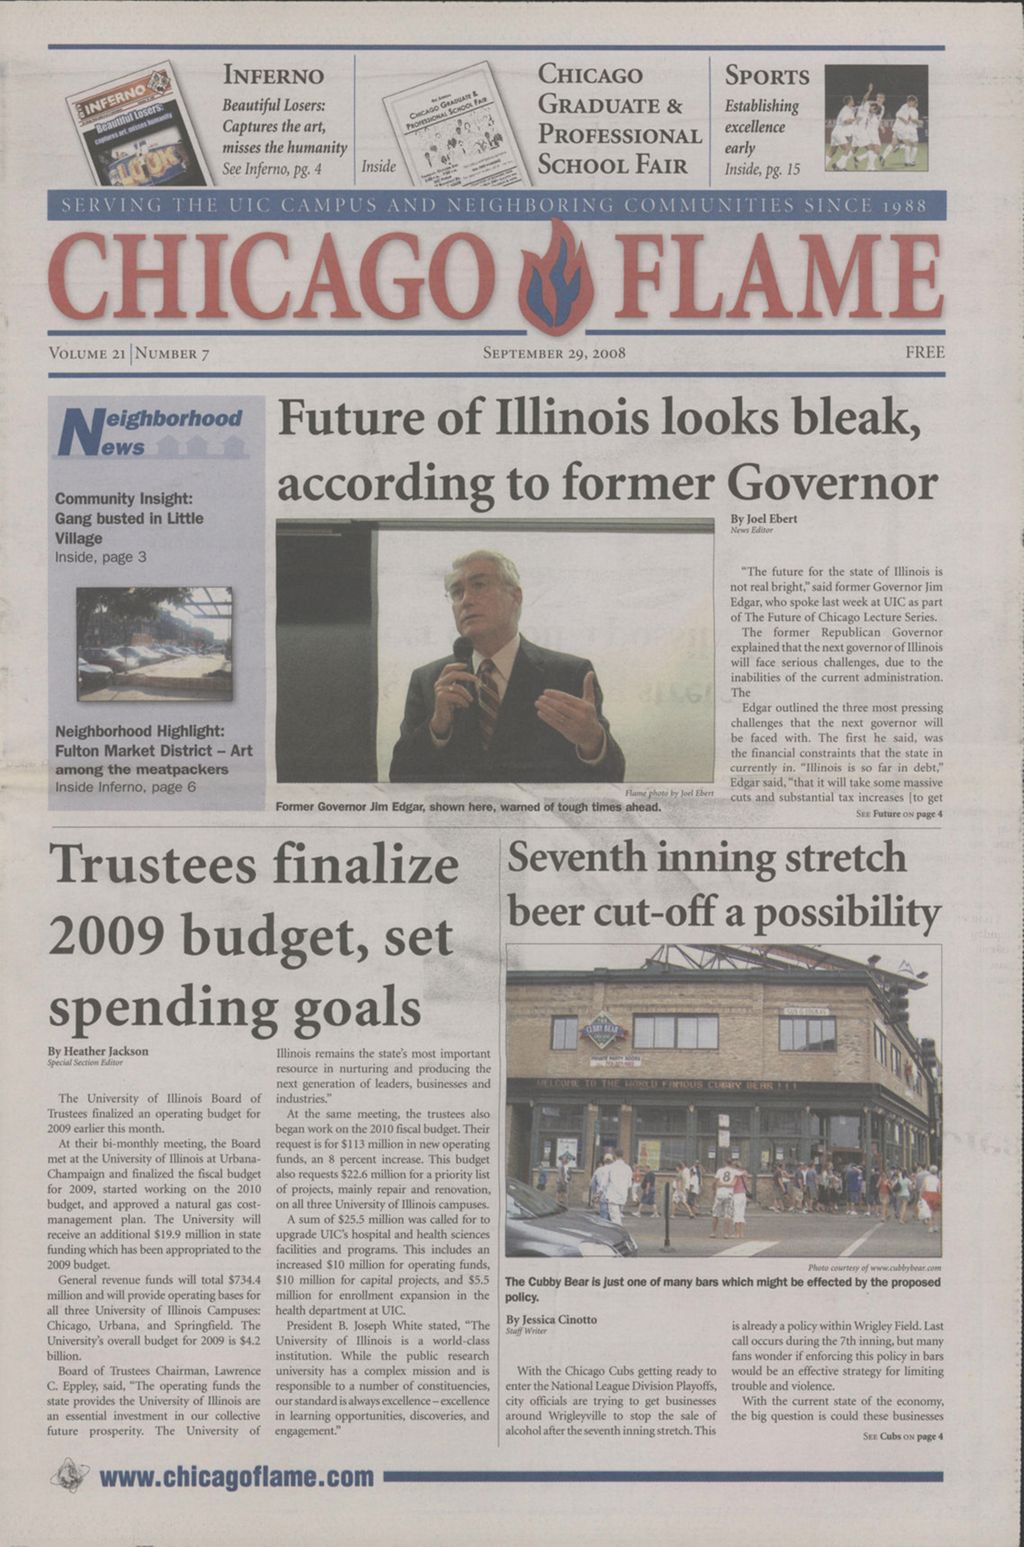 Miniature of Chicago Flame (September 29, 2008)